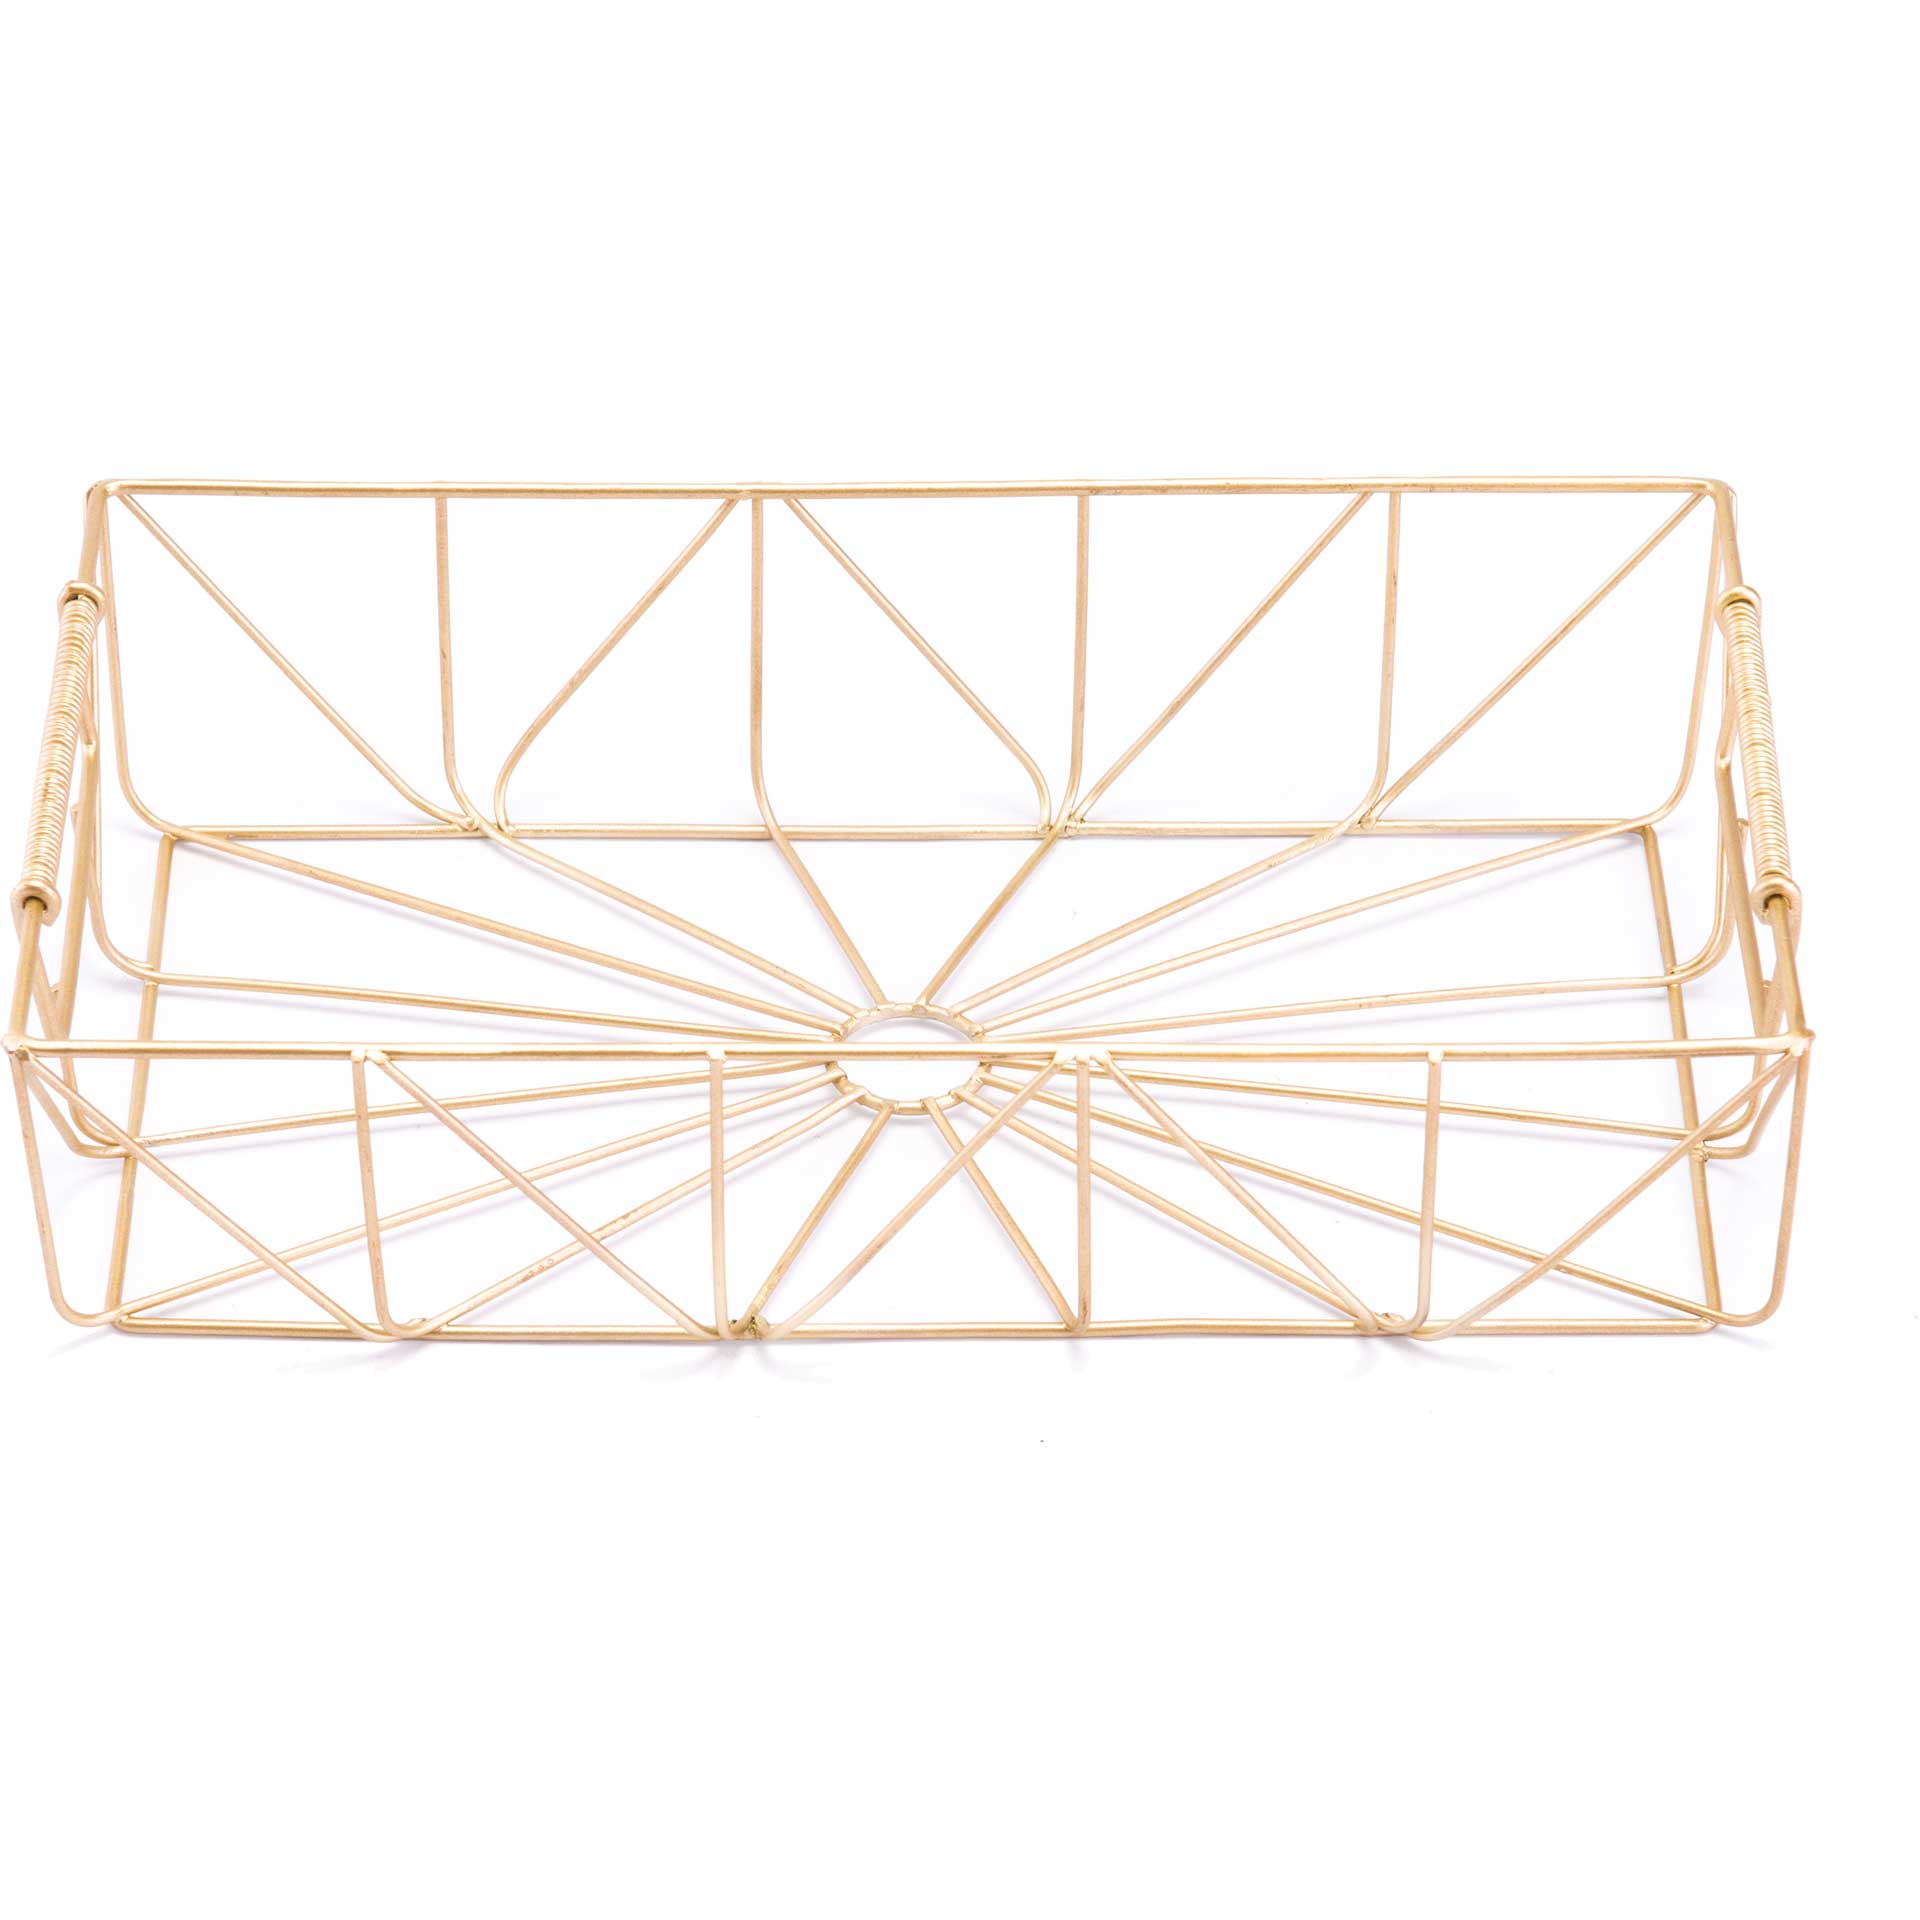 Wired Radiance Tray Gold (Set of 3)